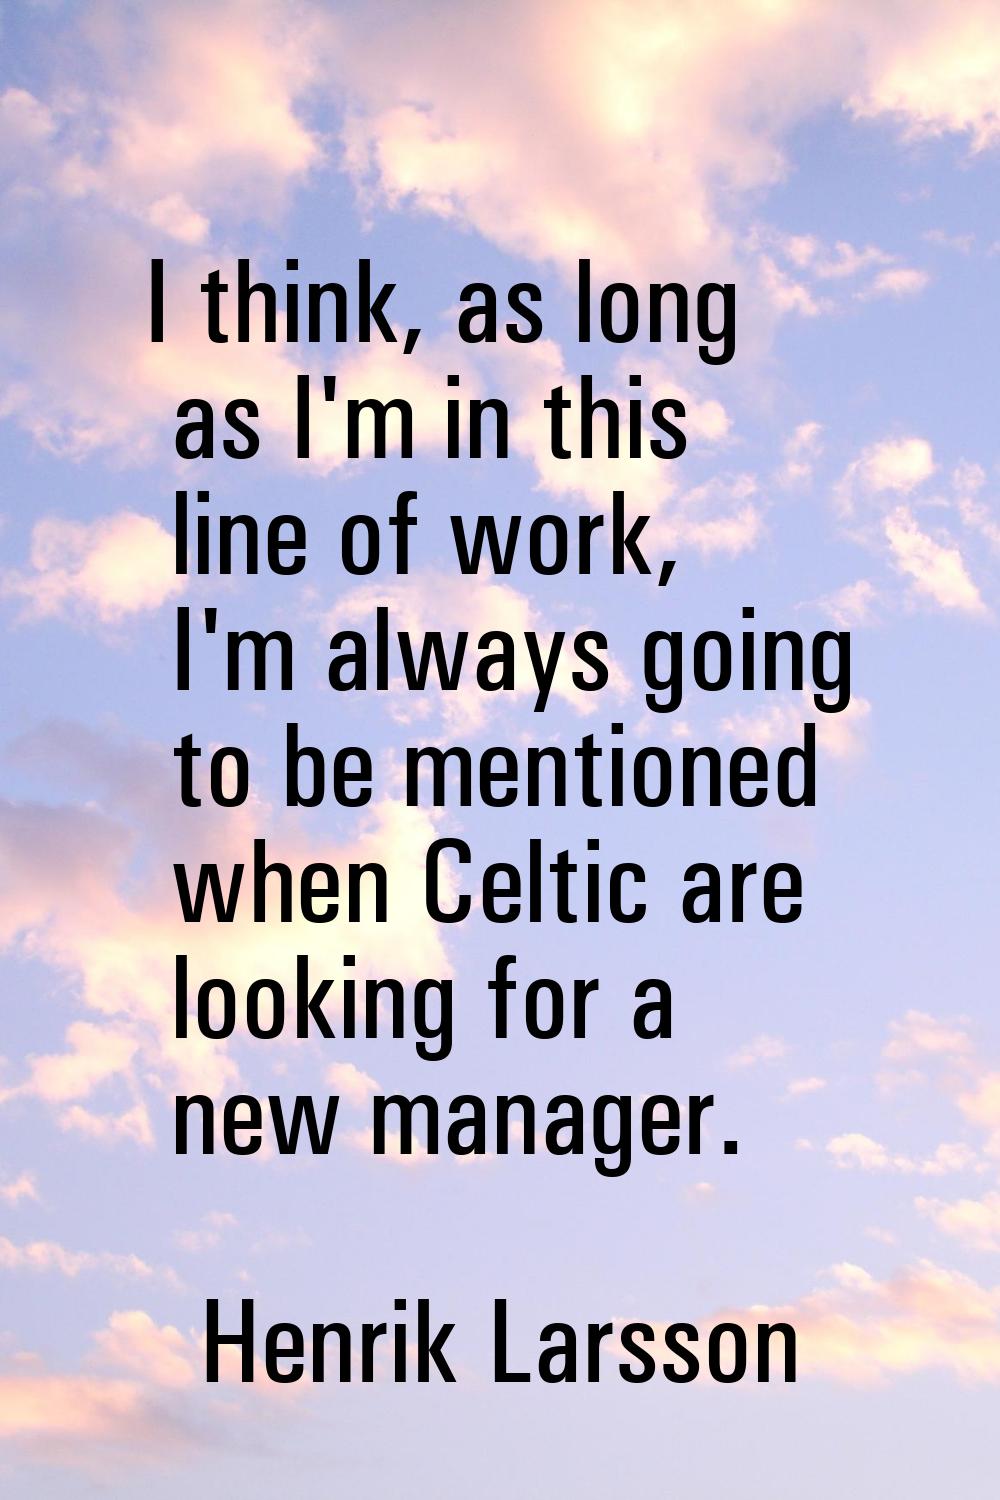 I think, as long as I'm in this line of work, I'm always going to be mentioned when Celtic are look